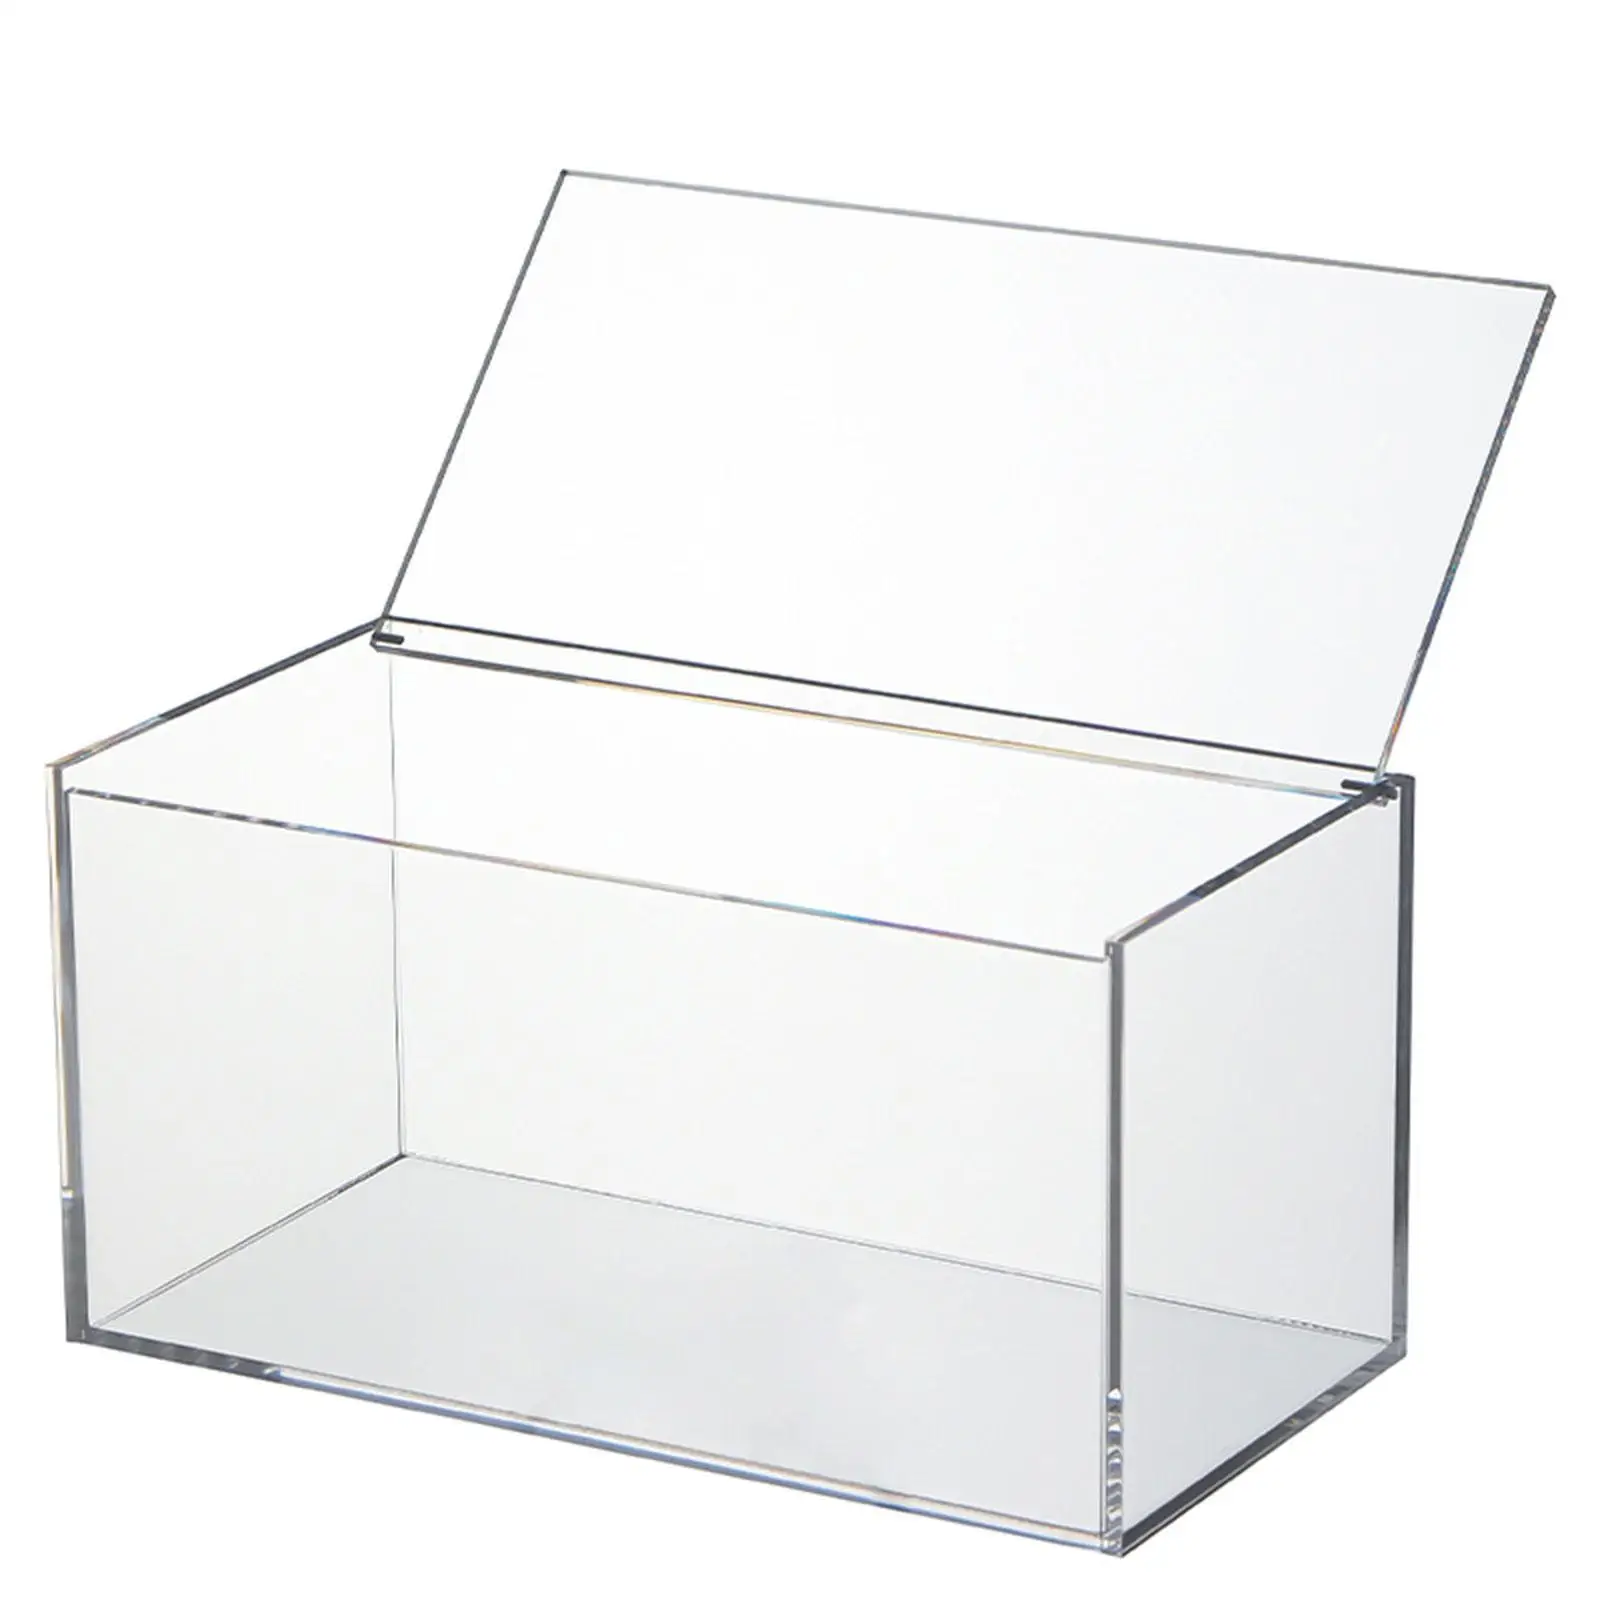 Acrylic Box with Lid Storing Organizer with Flip Covers Dustproof Multipurpose Durable Transparent Shop Coffee Holder Box